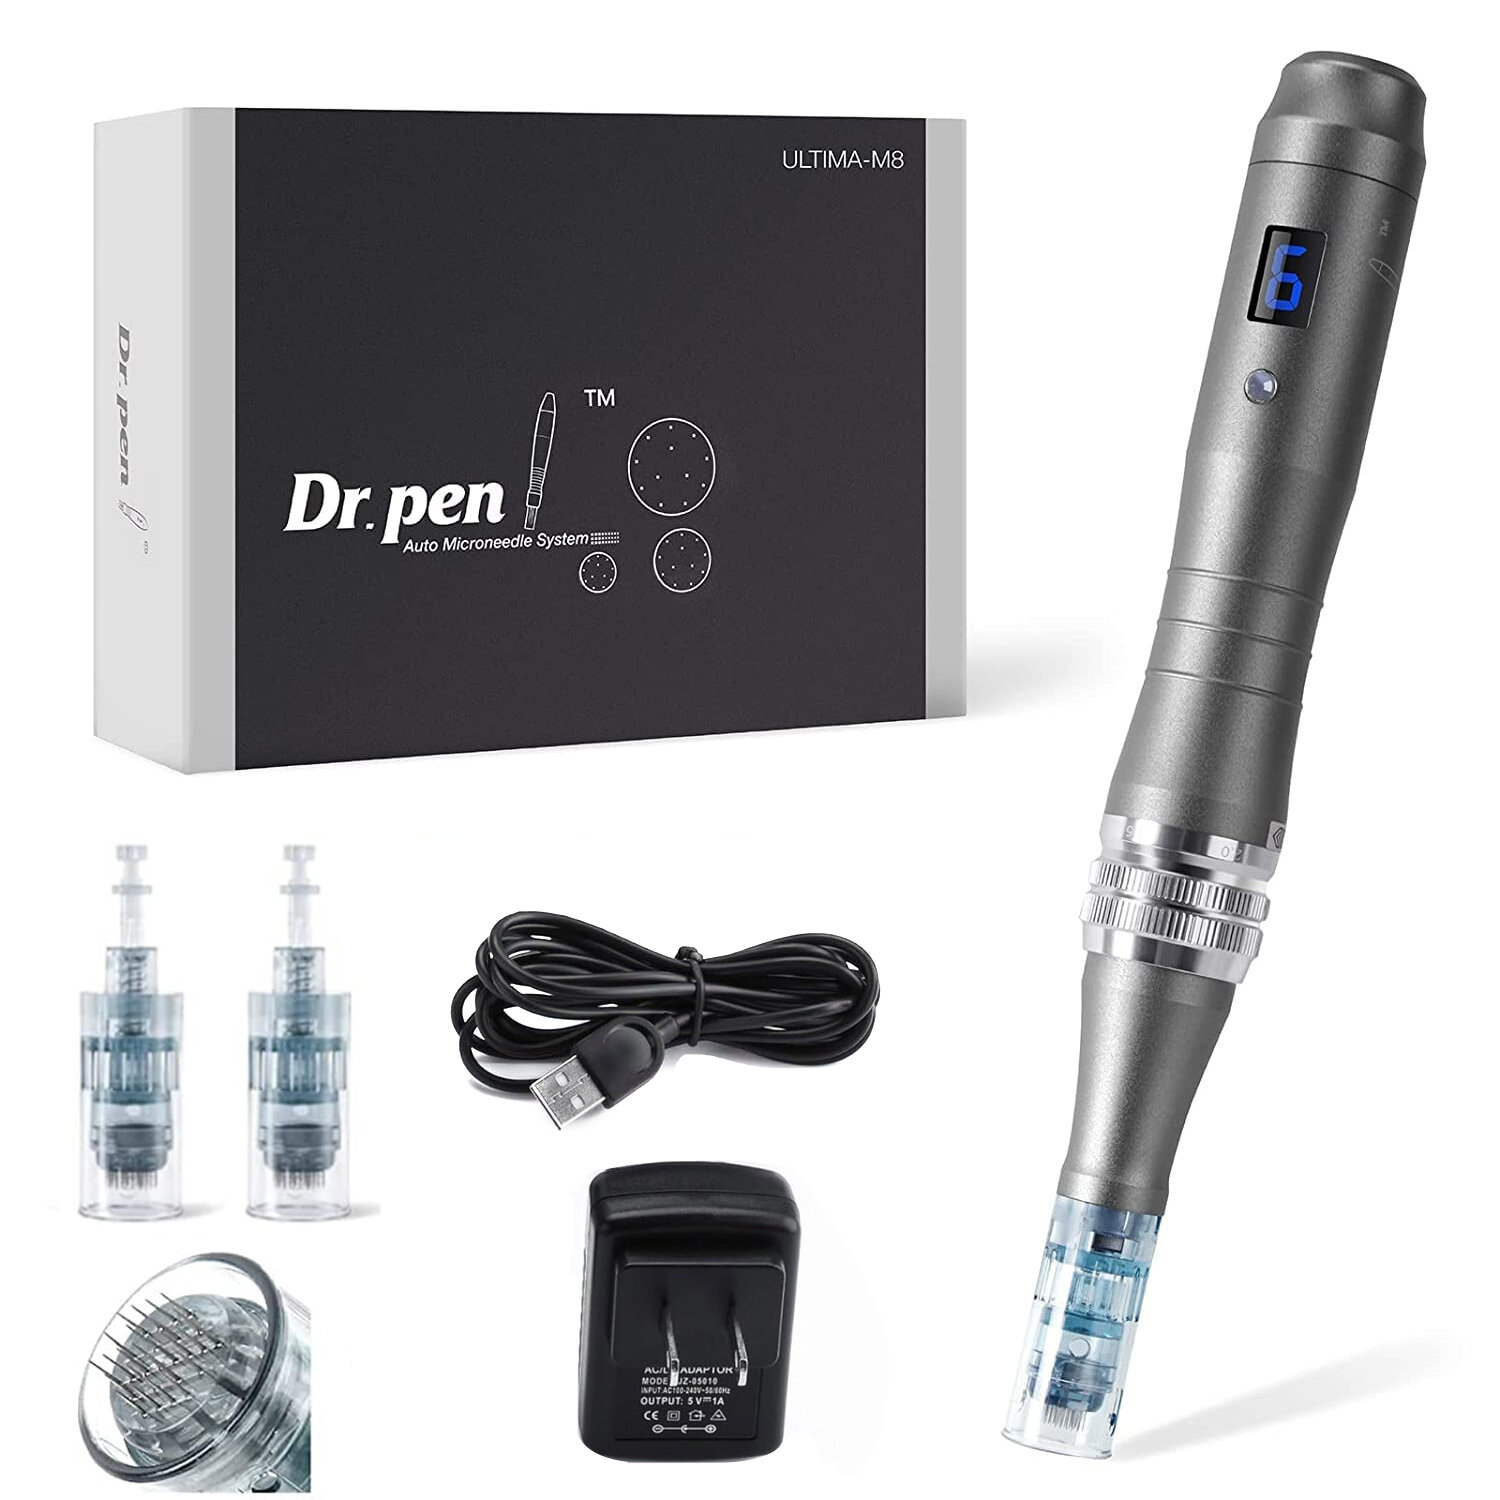 Dr. Pen Ultima M8 Professional Micro Needling Pen with Digital Display Adjustable Needle Length 0-0.3mm Aluminum Skin Care Beauty Pen Home Use Cordless Device 2 x 16-Pin Cartridges Included